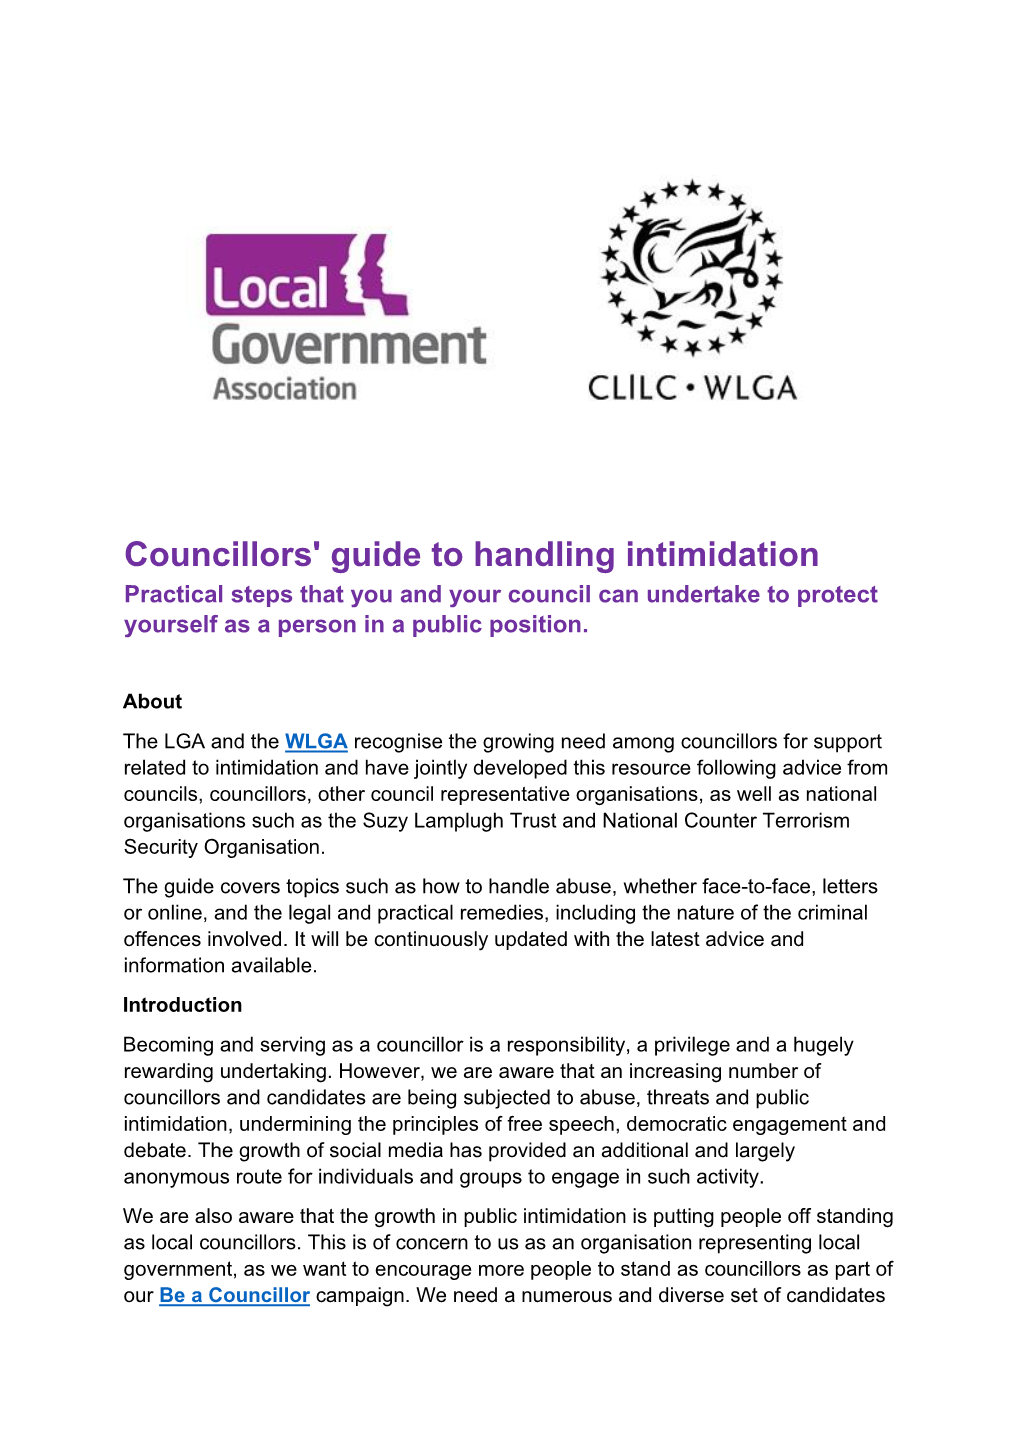 Councillors' Guide to Handling Intimidation Practical Steps That You and Your Council Can Undertake to Protect Yourself As a Person in a Public Position